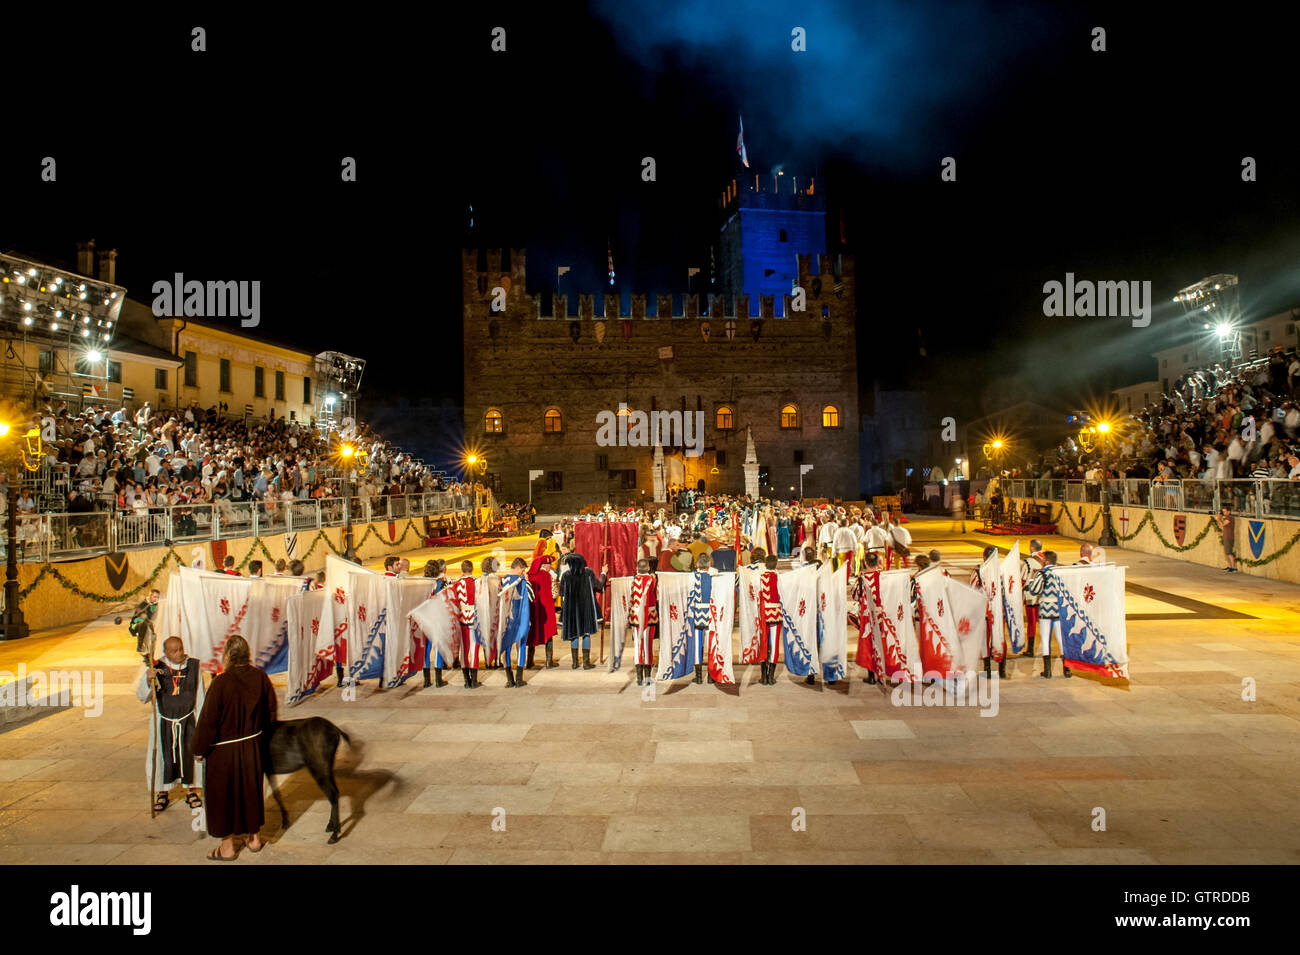 Marostica, Italy. 9th september, 2016. Participants in costume attend the  traditional human chess game in Marostica, Vicenza. Credit: Tony Anna  Mingardi / Awakening / Alamy Live News Stock Photo - Alamy